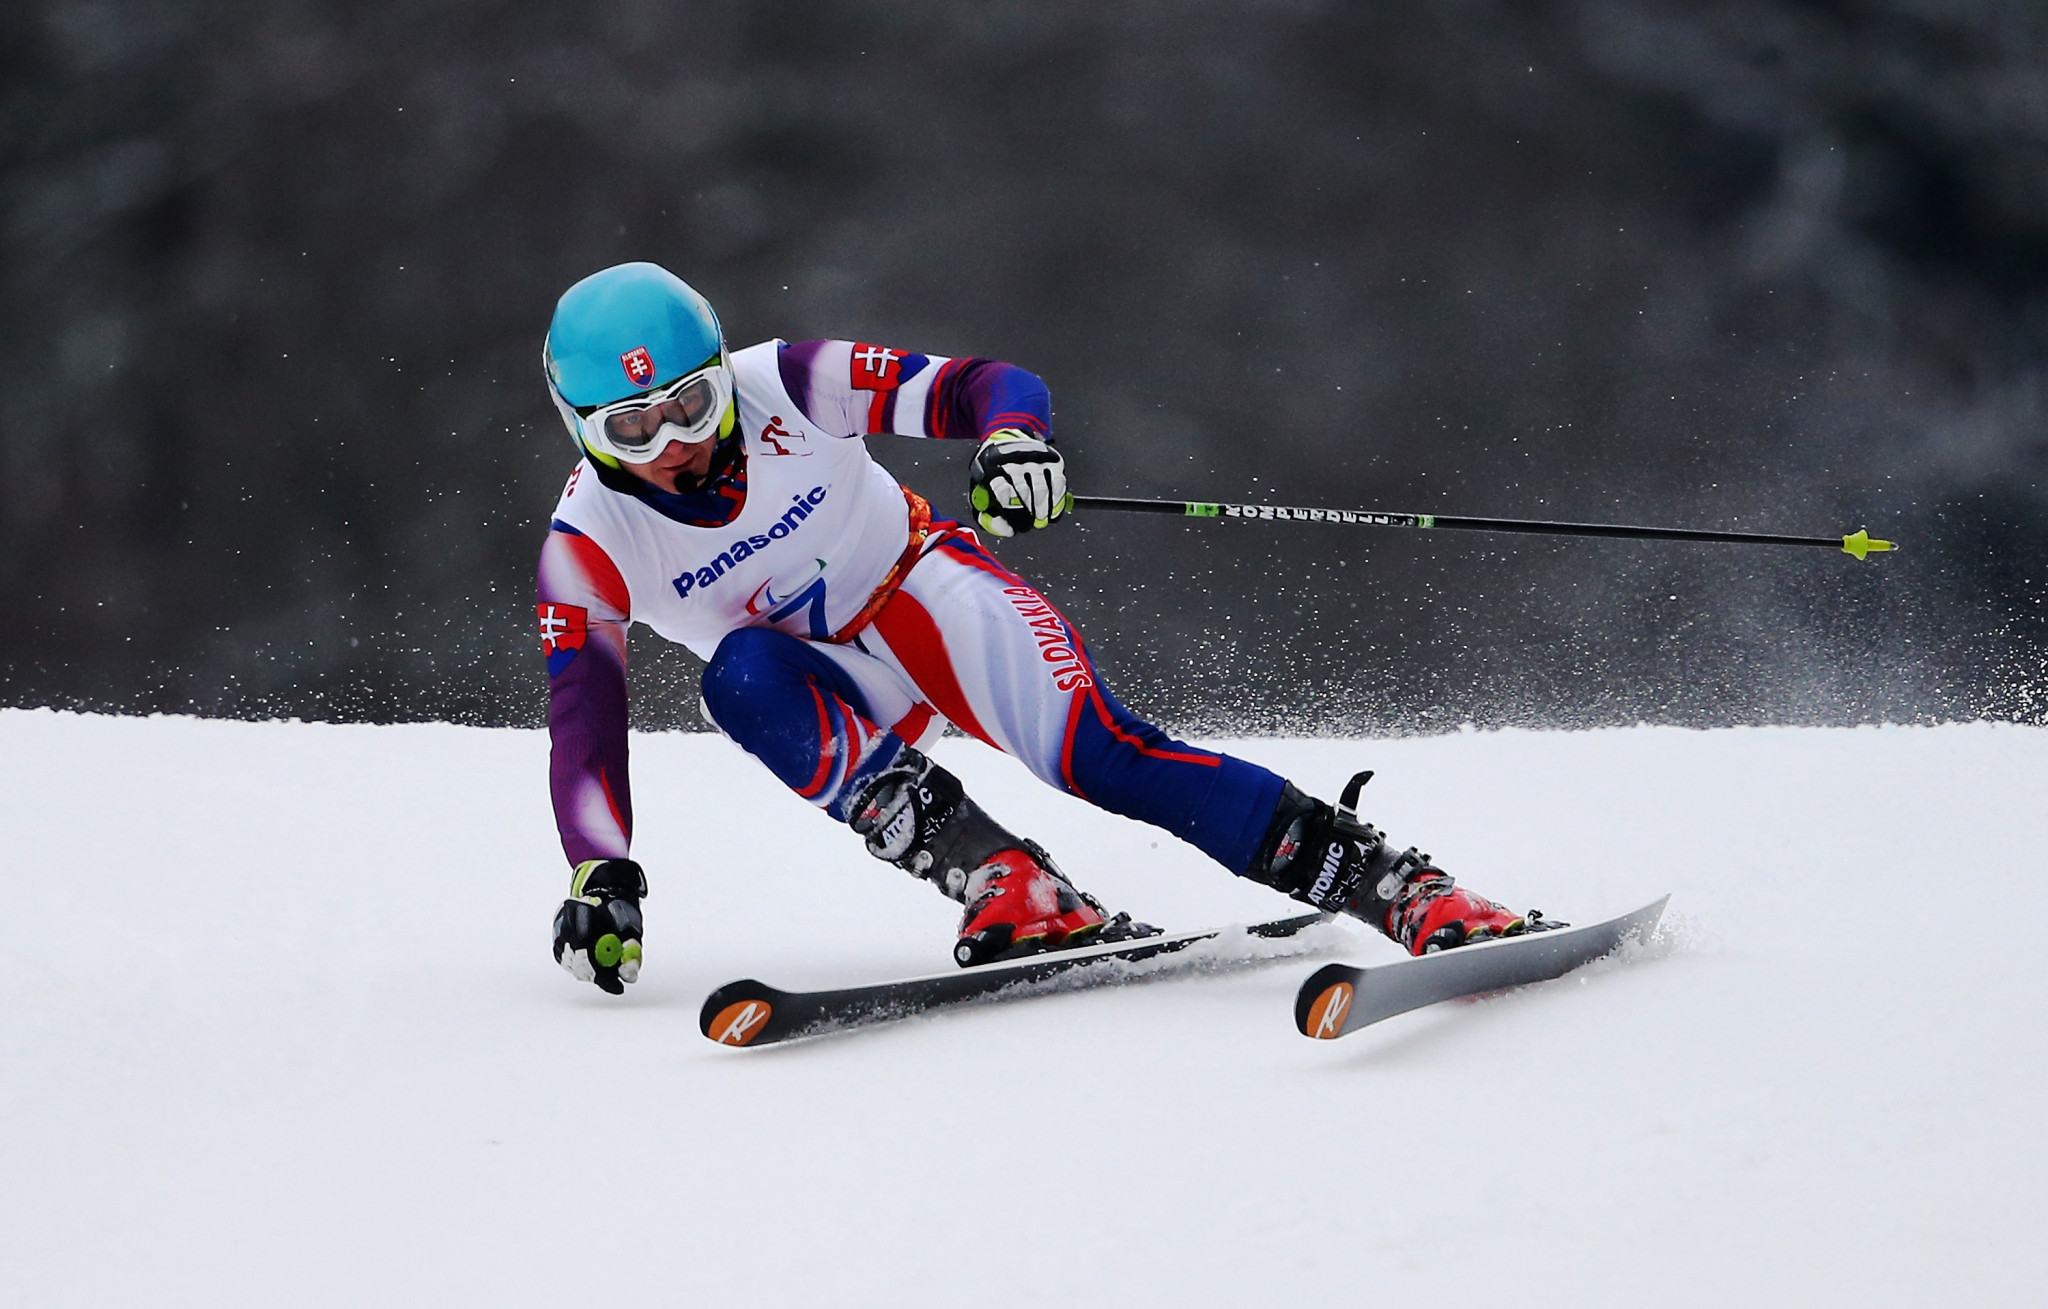 Jakub Krako is yet to win a World Cup medal this season ©Getty Images